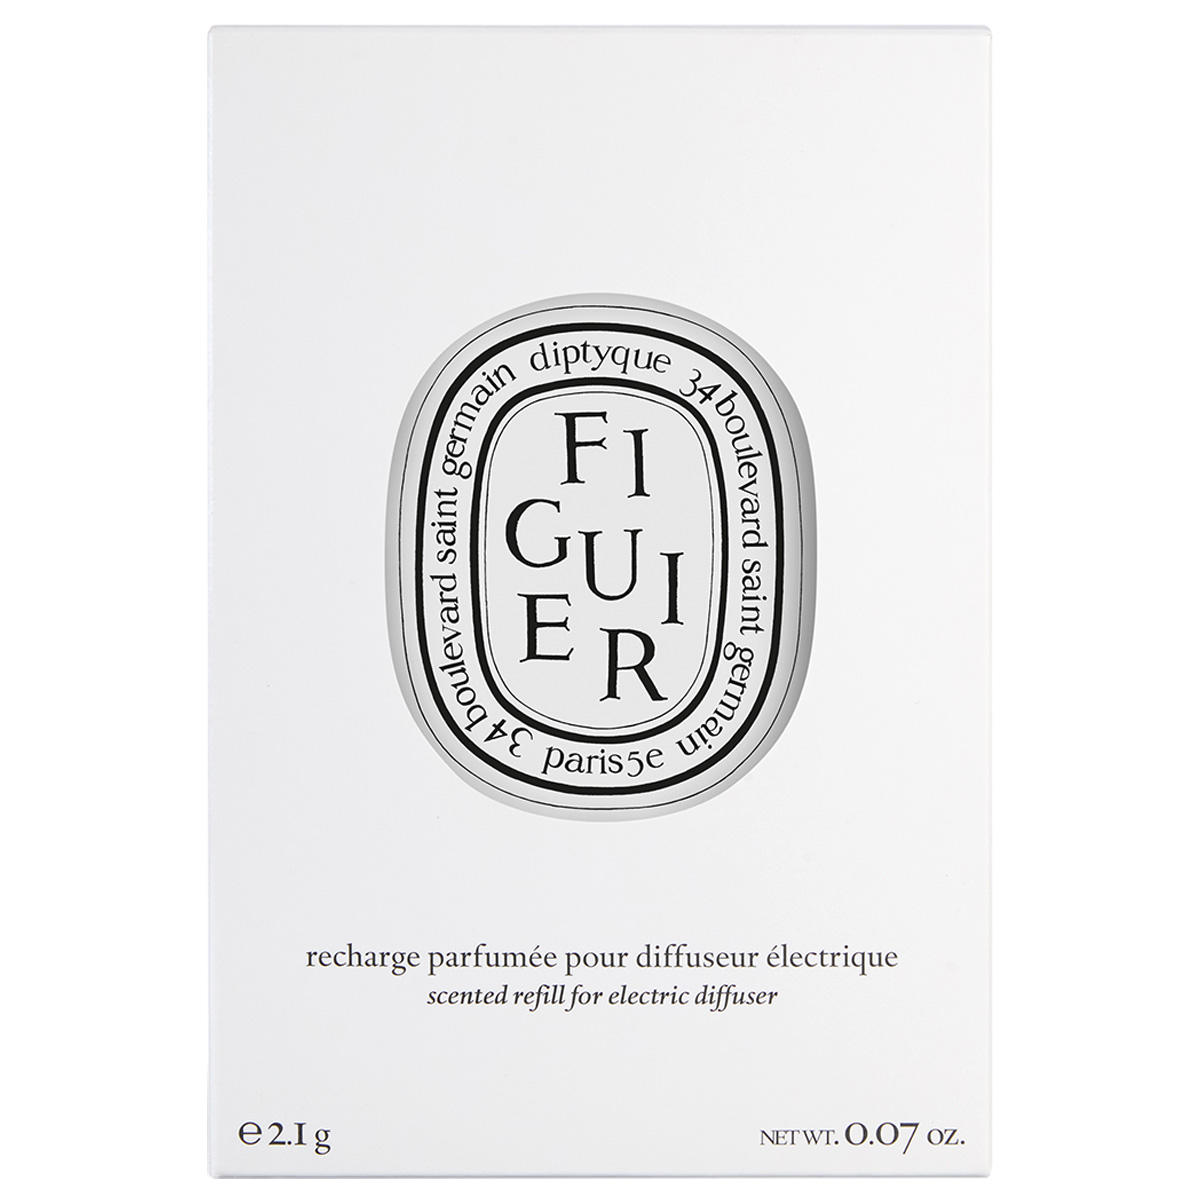 diptyque Capsule Figuier scented refill for electric car diffuser 2,1 g - 1